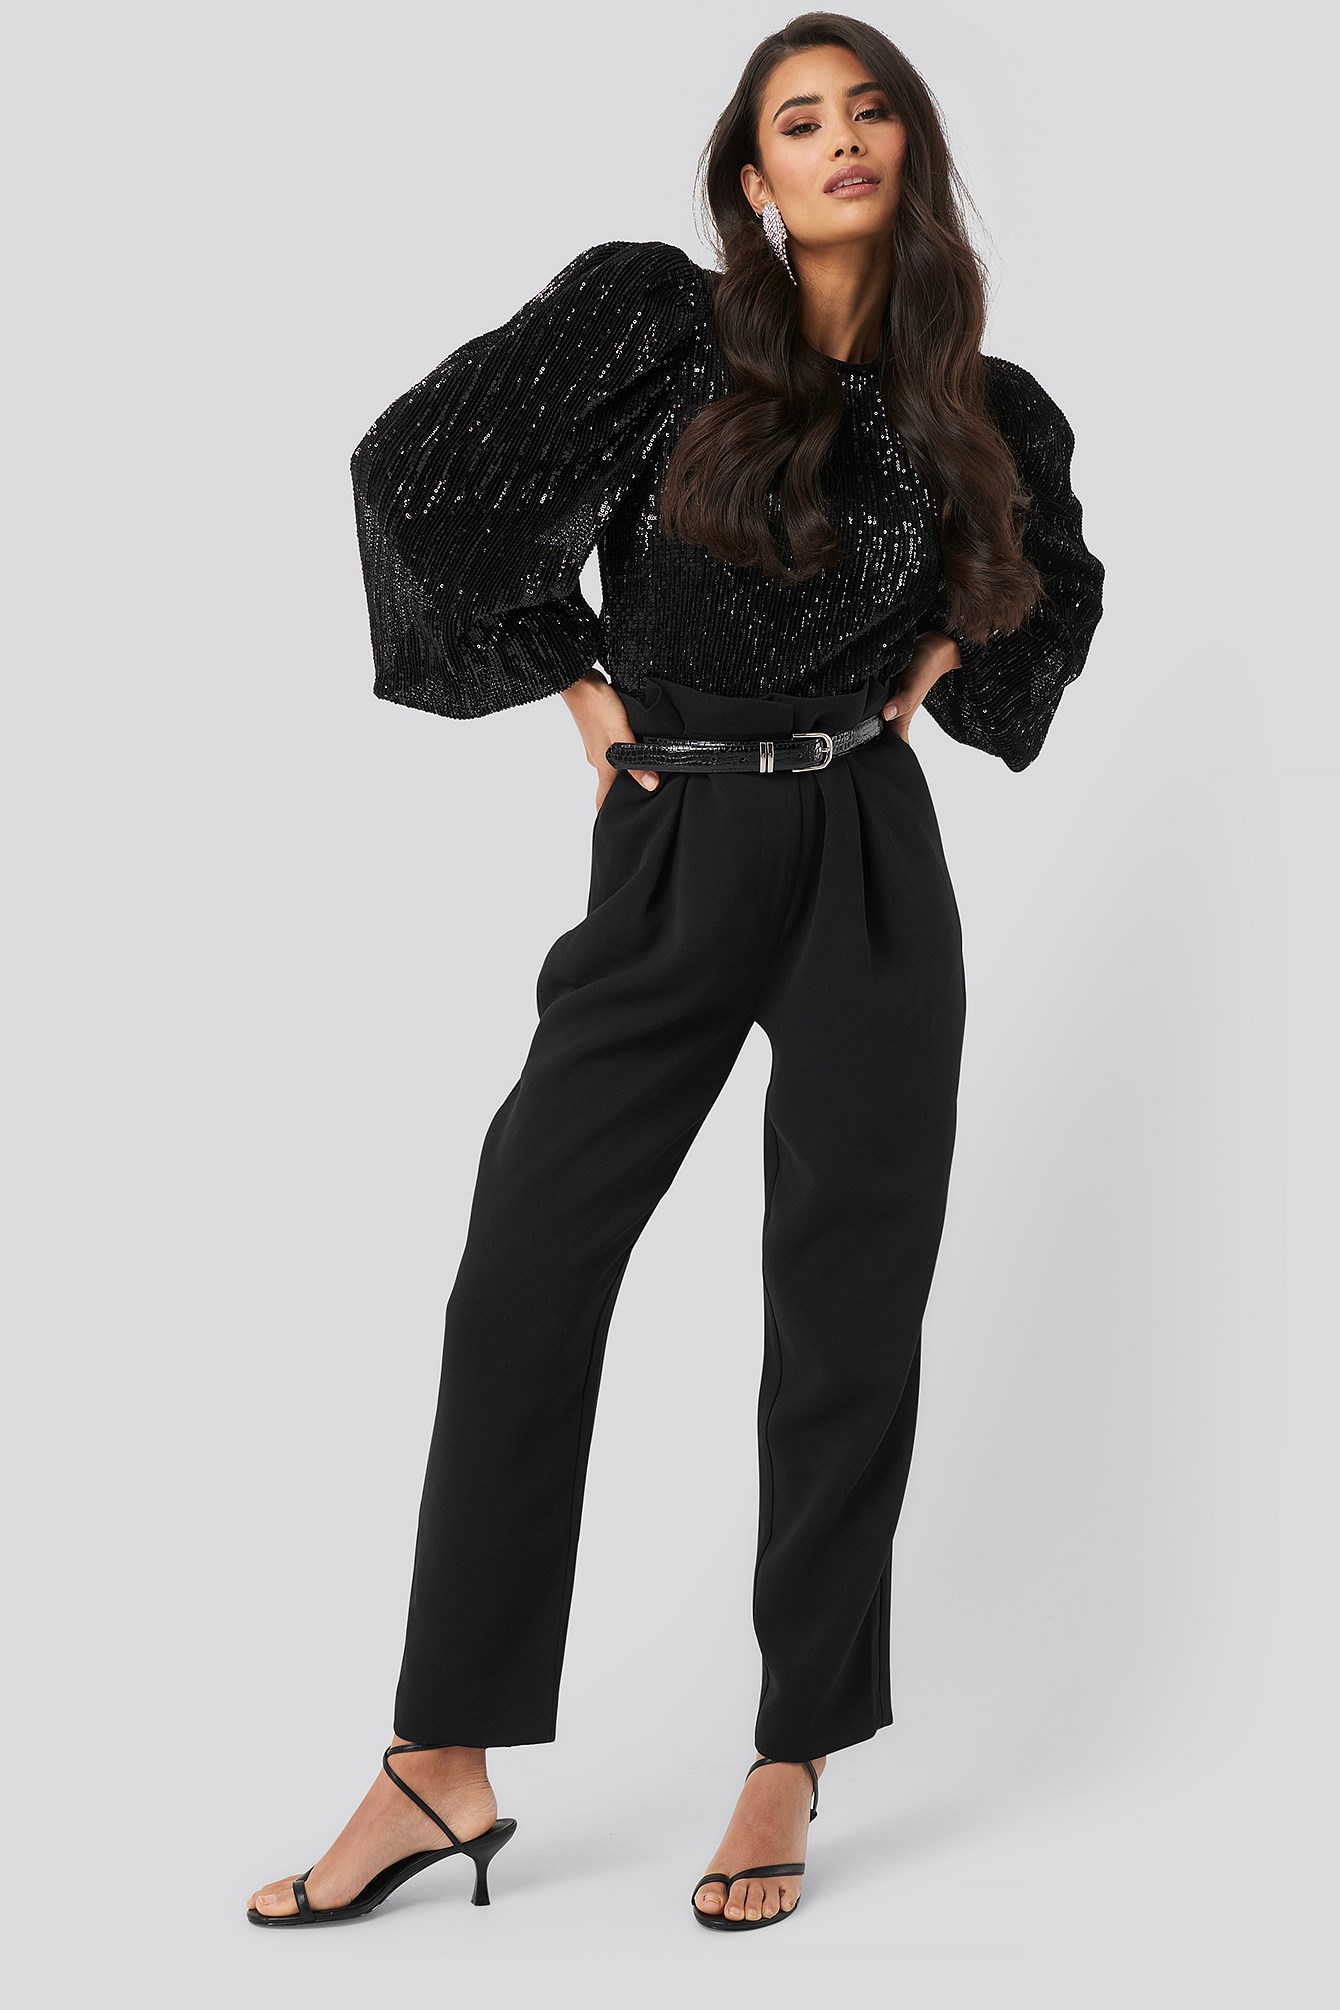 Puff Sleeeve Sequin Blouse Black Outfit